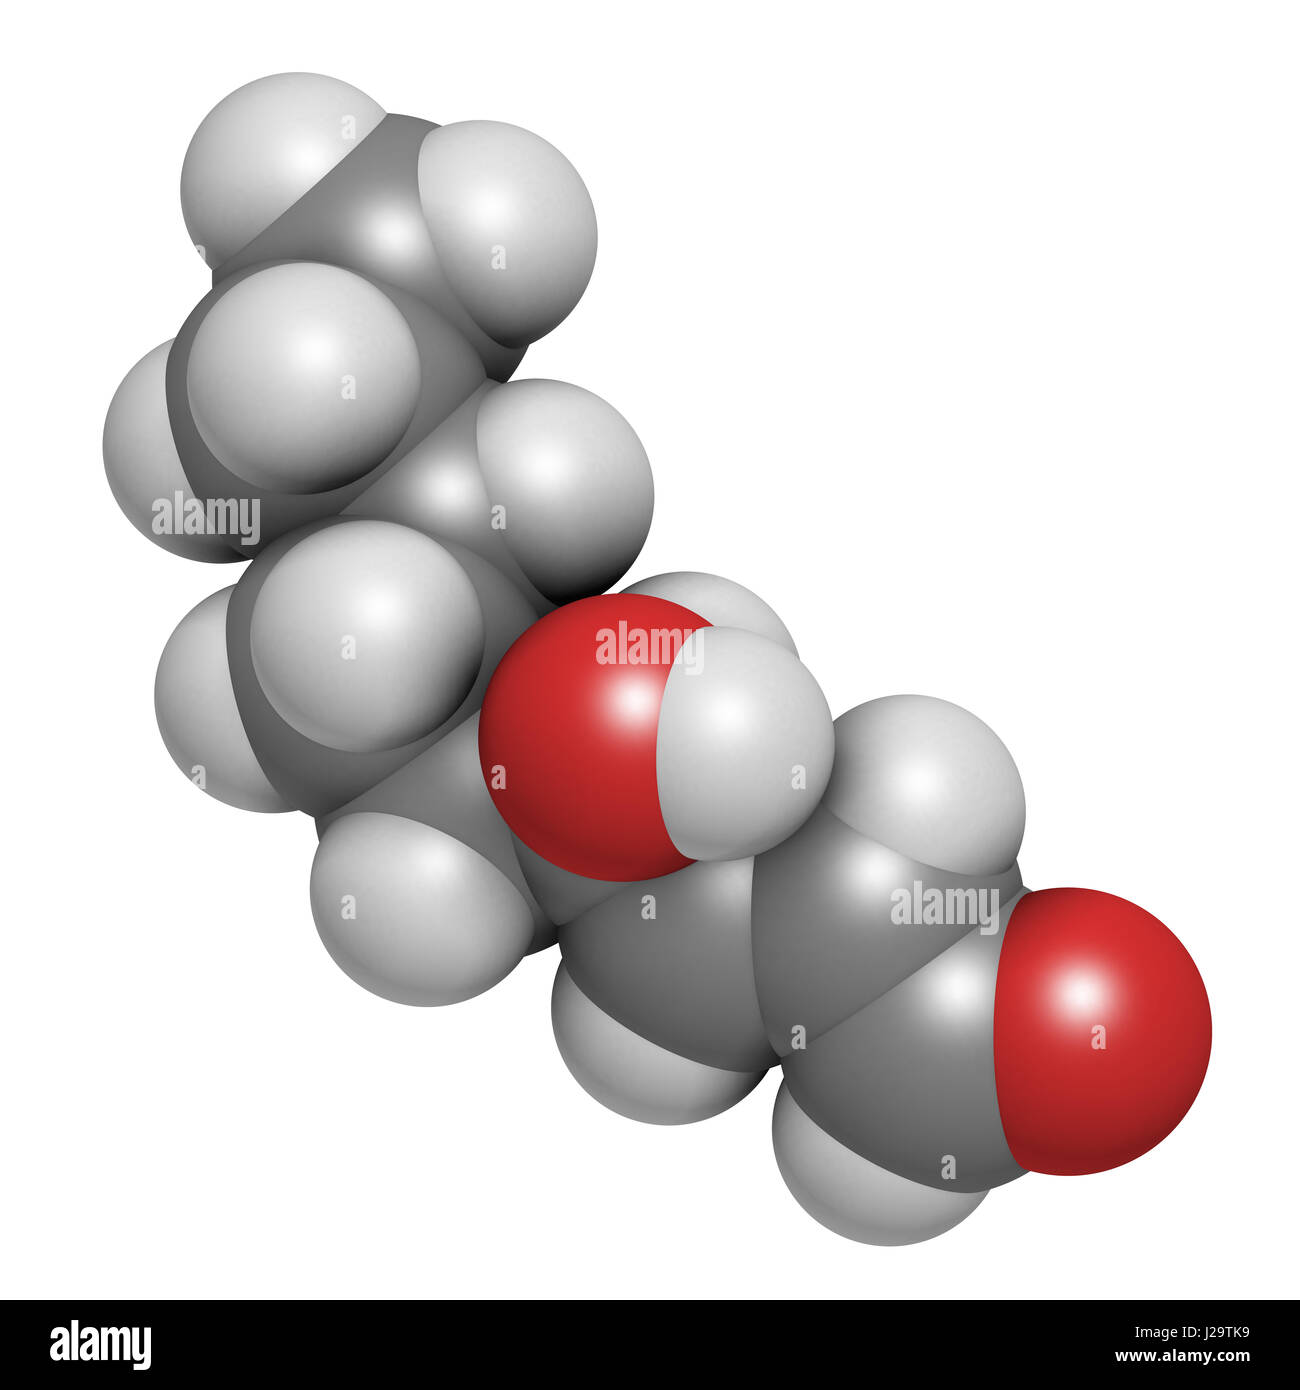 4-Hydroxynonenal (HNE) molecule. Metabolite produced by lipid peroxidation of polyunsaturated omega-6 fatty acids. 3D rendering. Atoms are represented Stock Photo